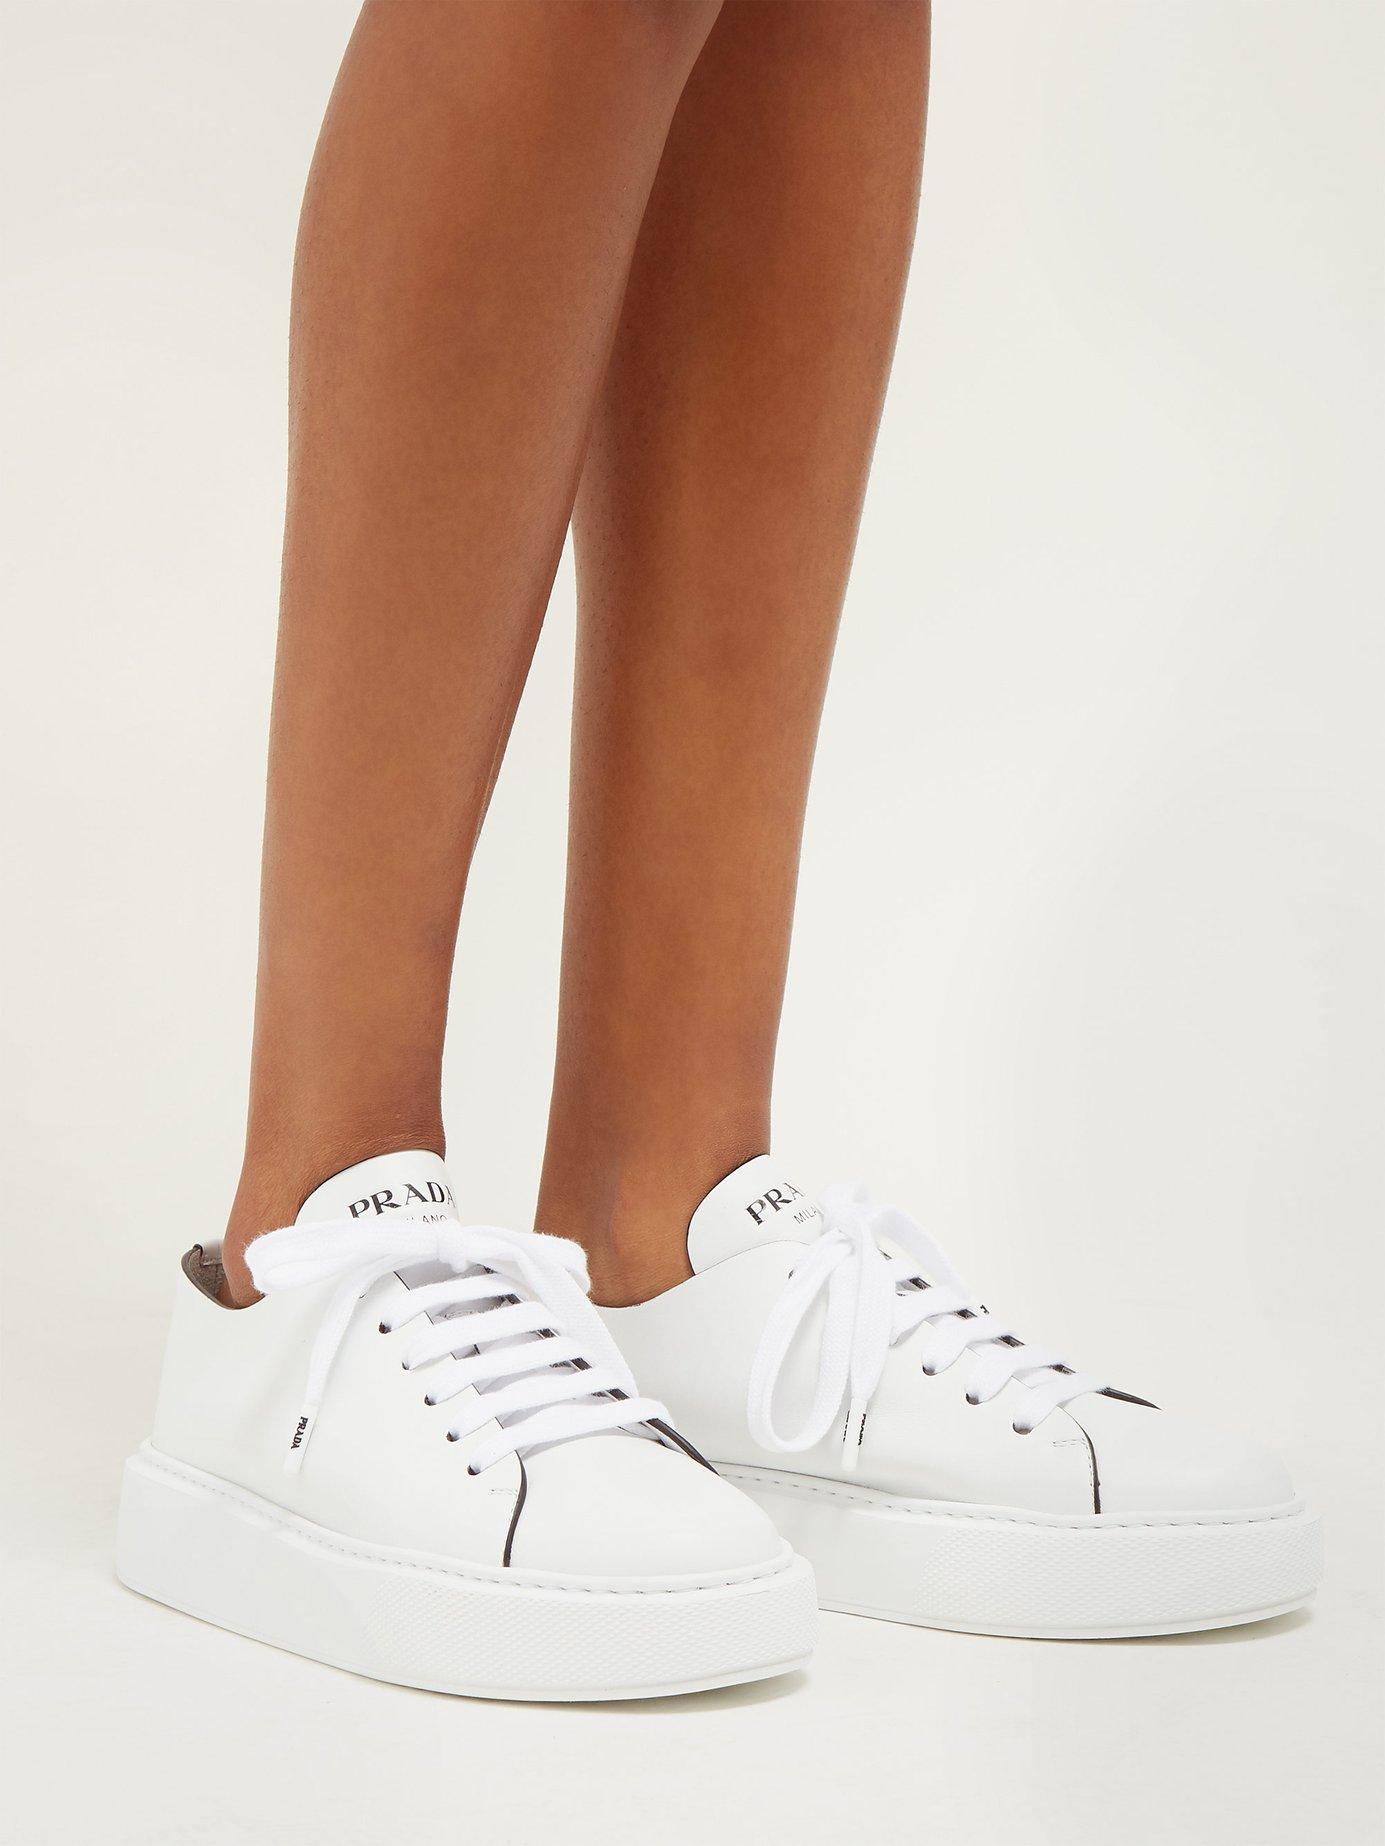 Prada Leather Low-top Sneakers in White | Lyst